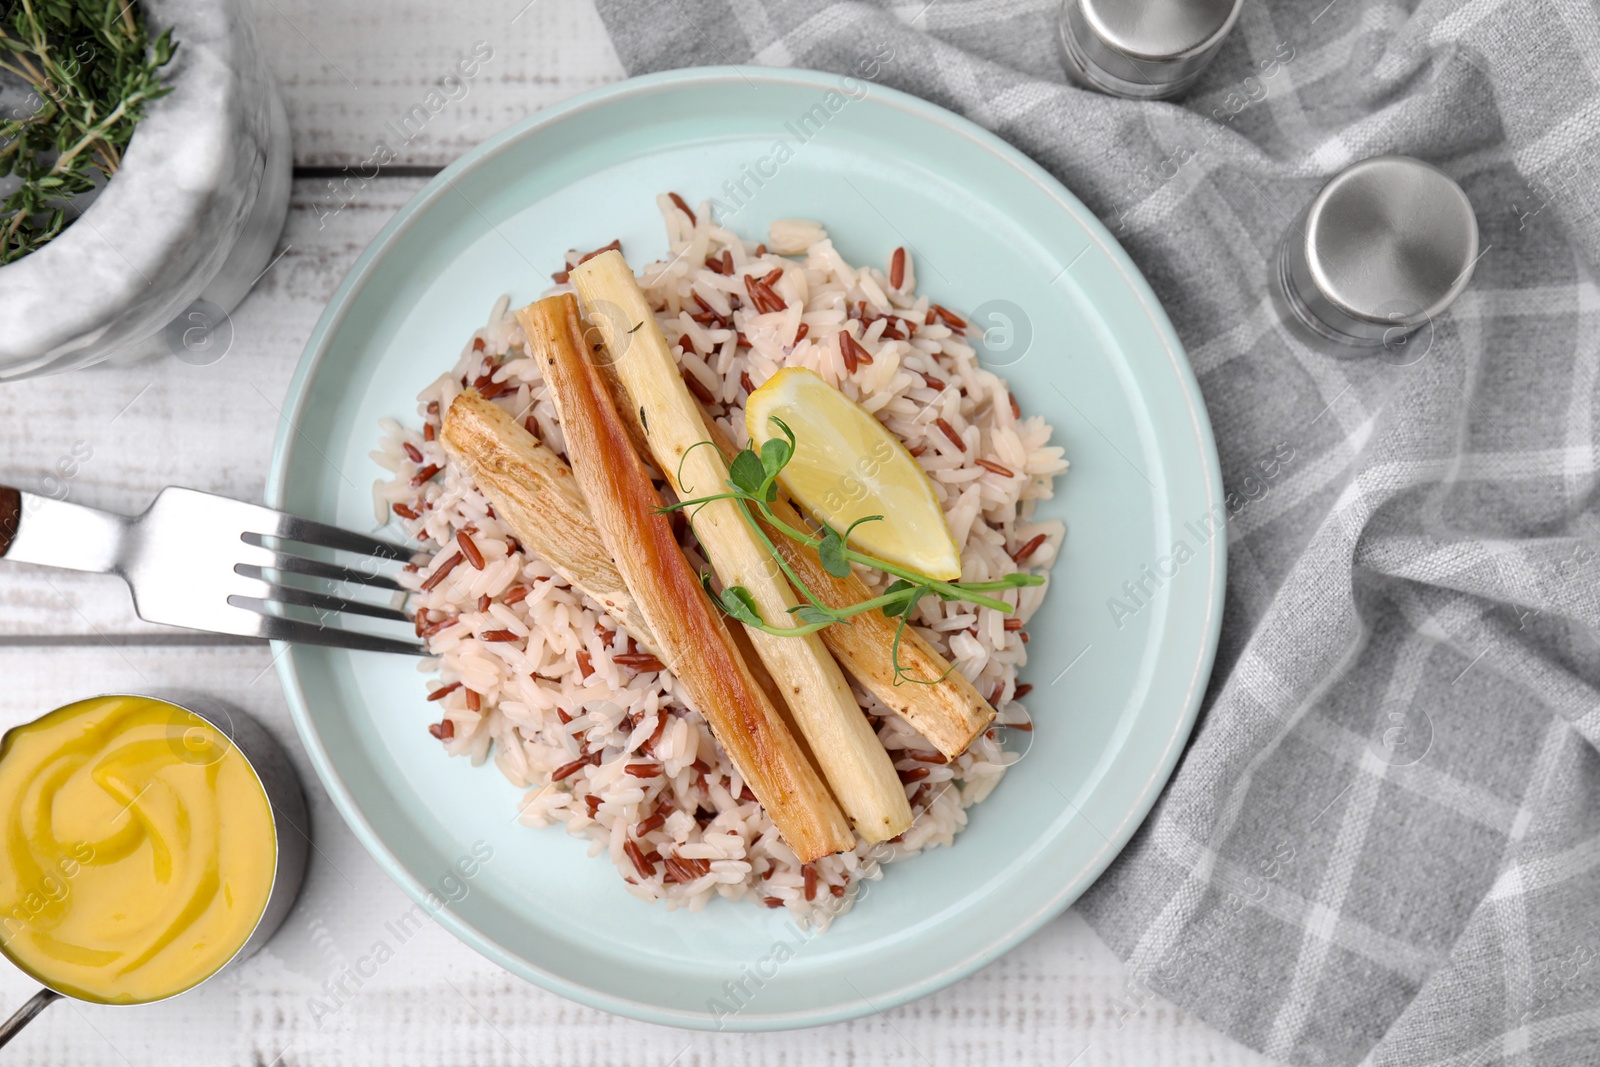 Photo of Plate with baked salsify roots, lemon, rice and fork on white wooden table, flat lay